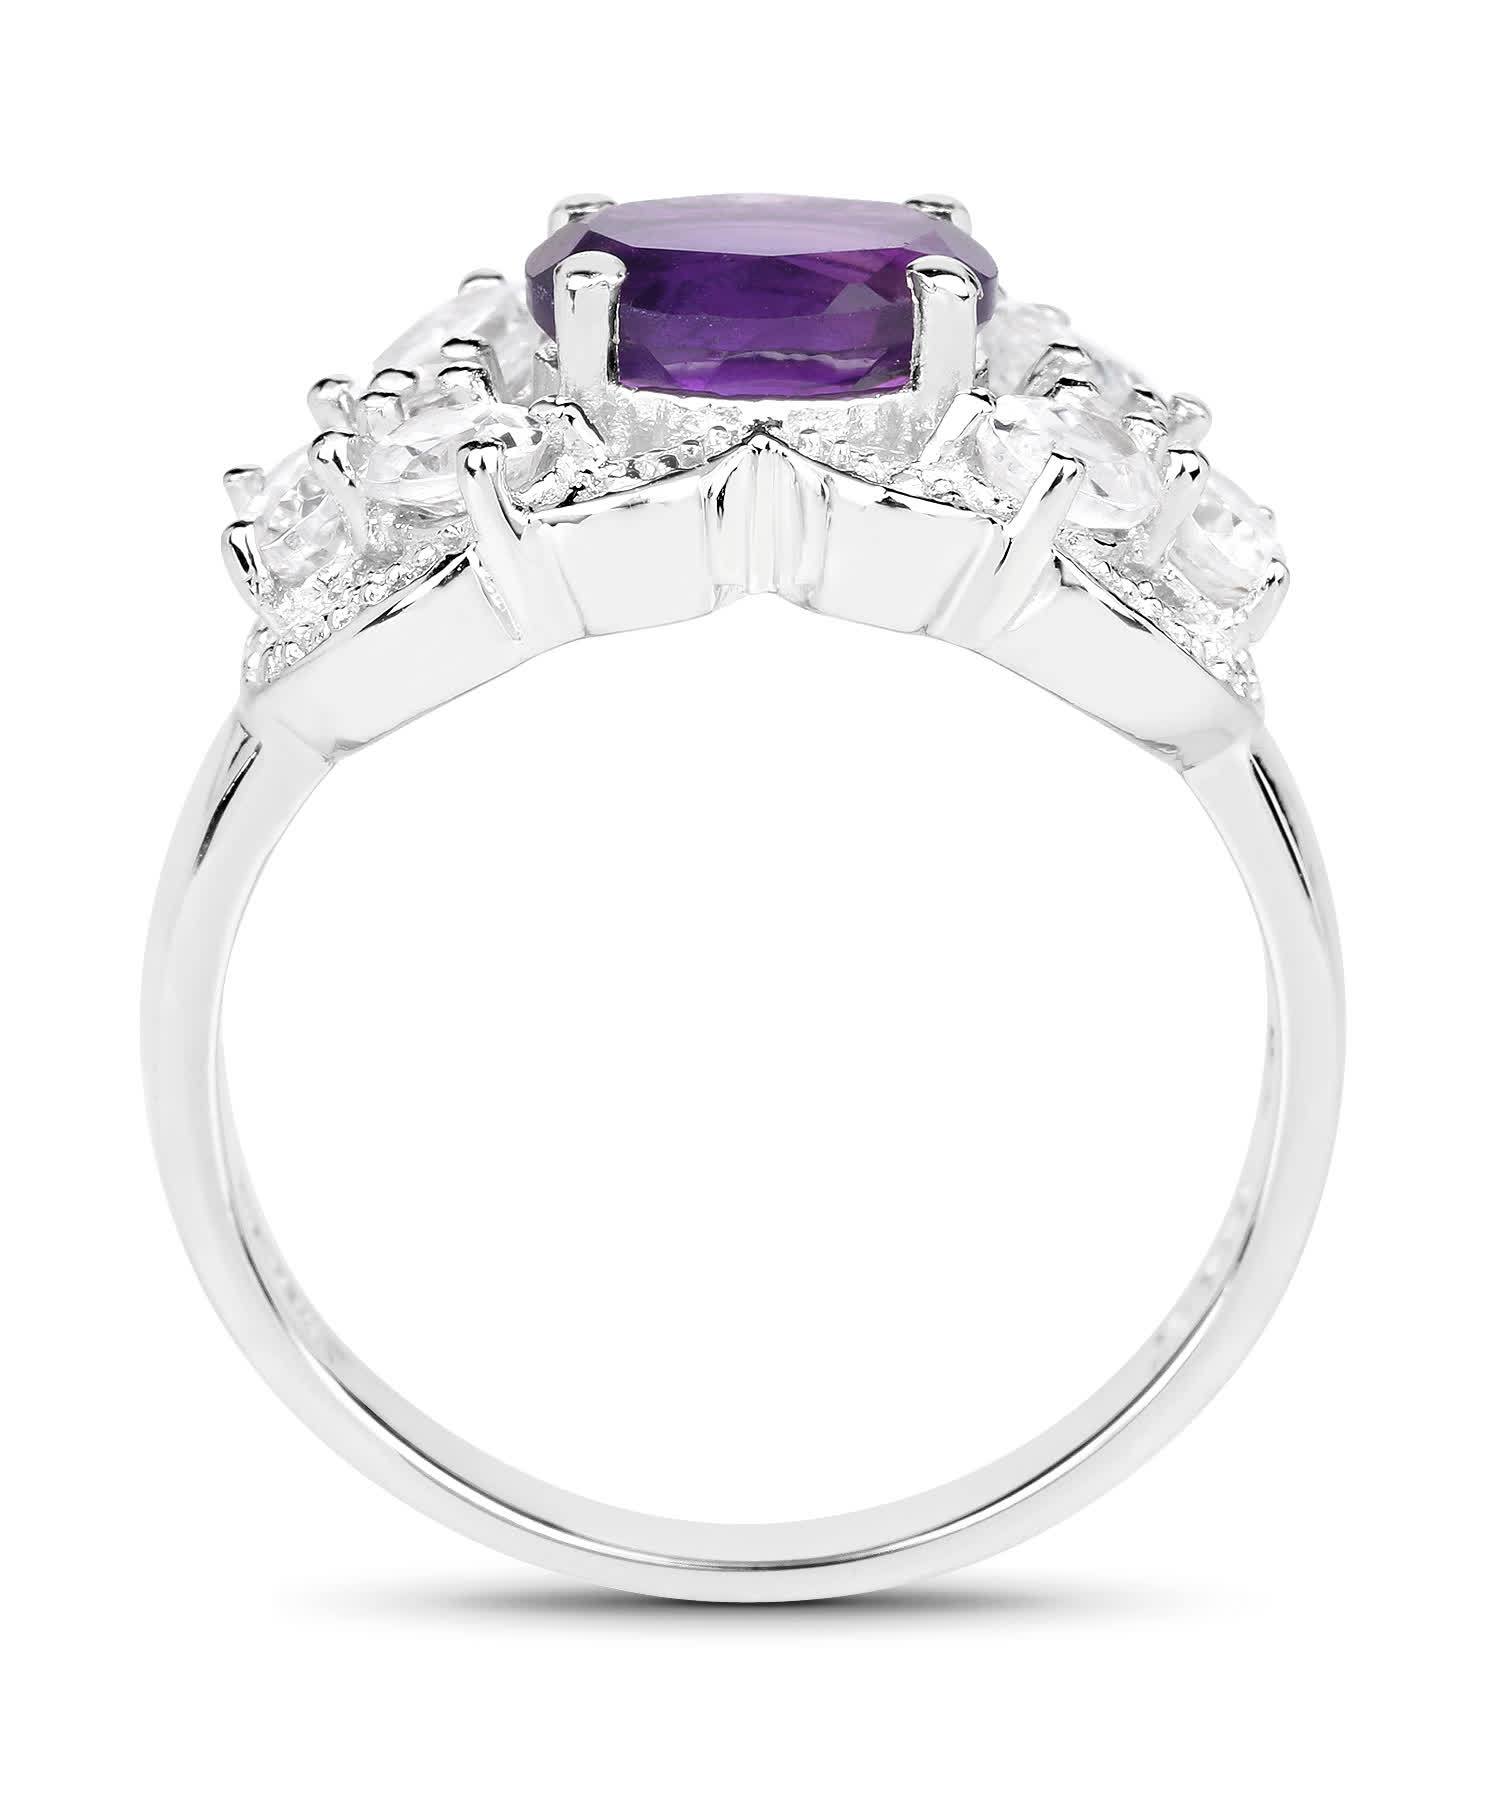 2.75ctw Natural Amethyst and Zircon Rhodium Plated 925 Sterling Silver Ring View 2